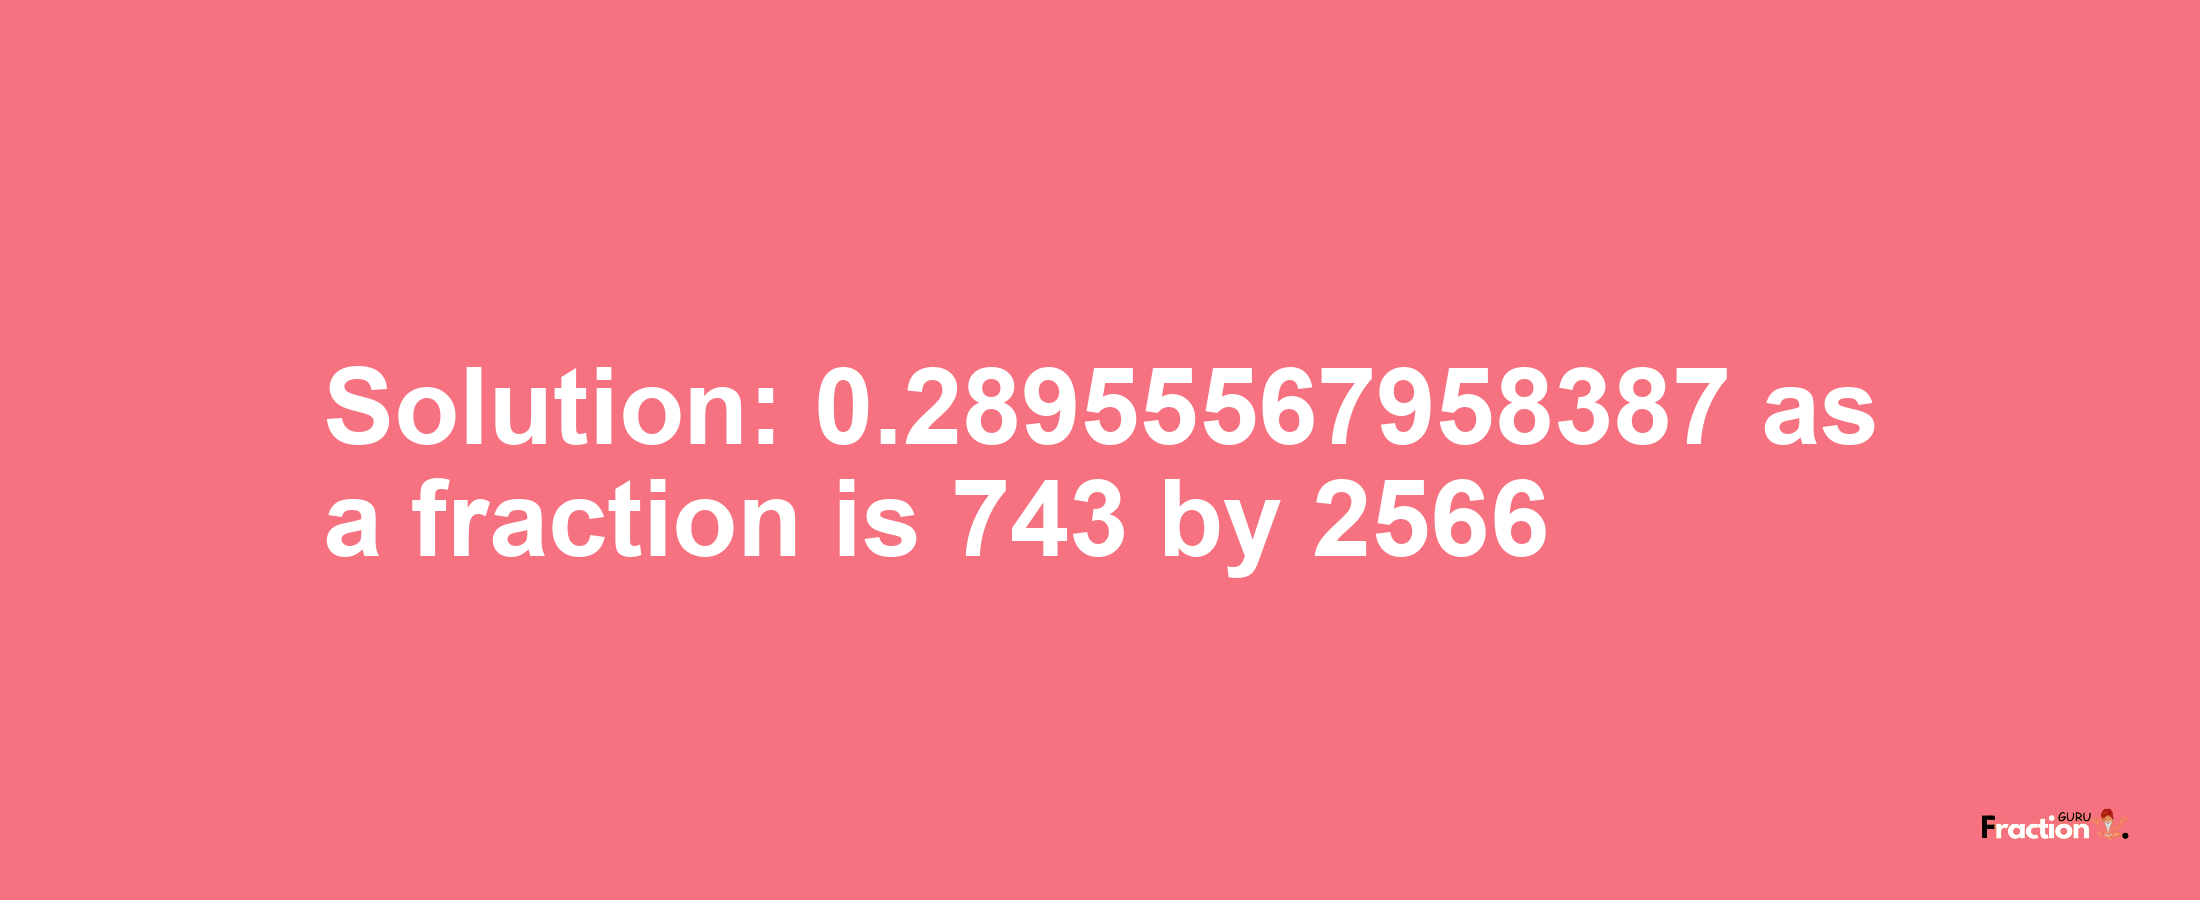 Solution:0.28955567958387 as a fraction is 743/2566